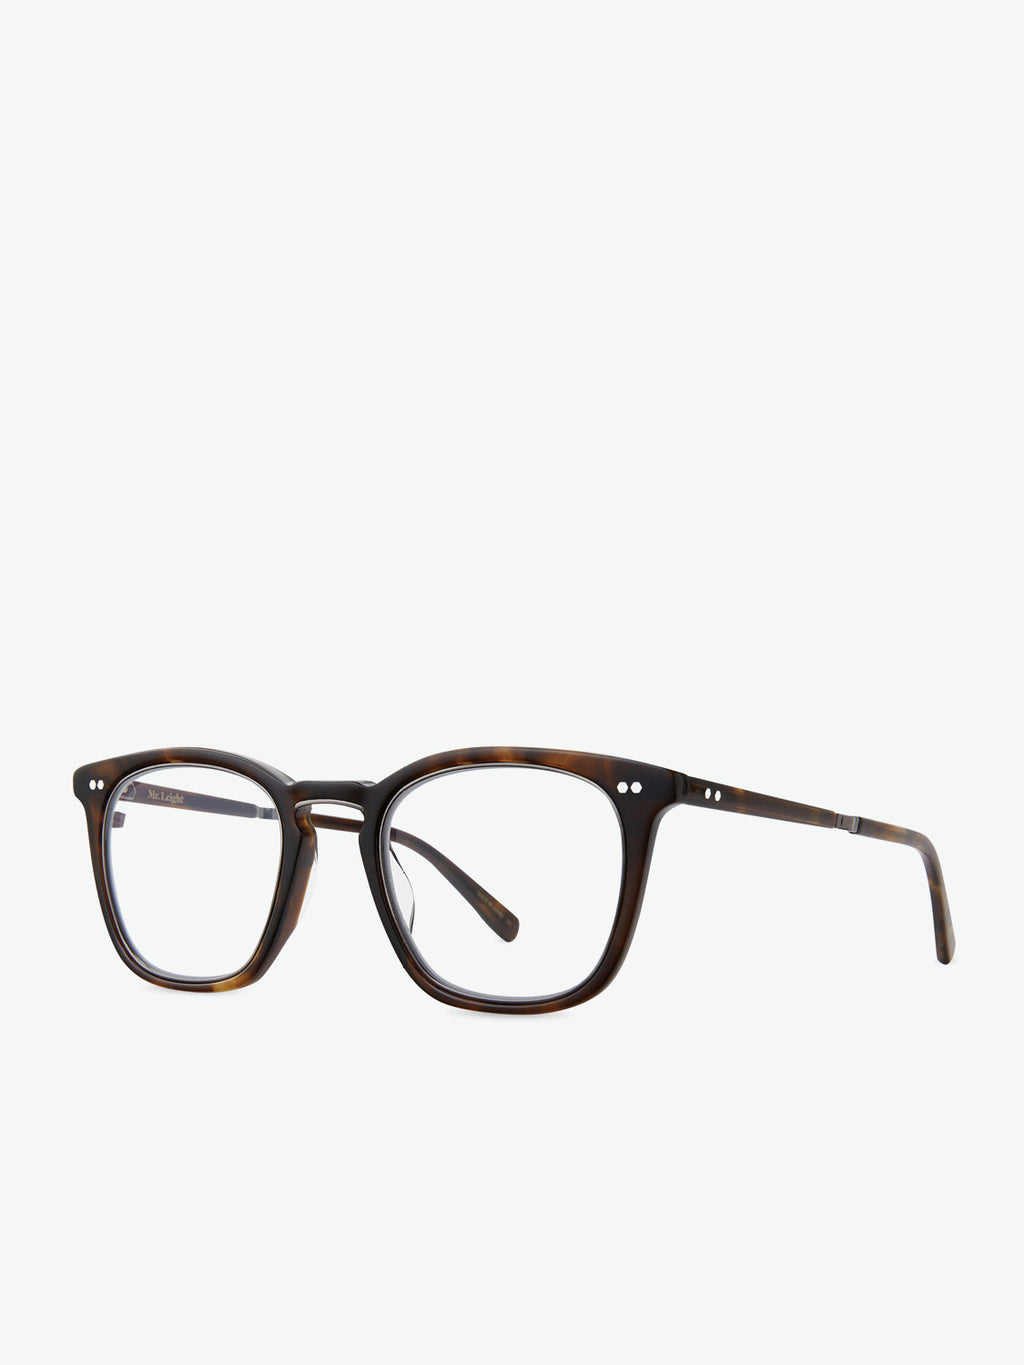 Mr. Leight | Men's Sunglasses | The Project Garments